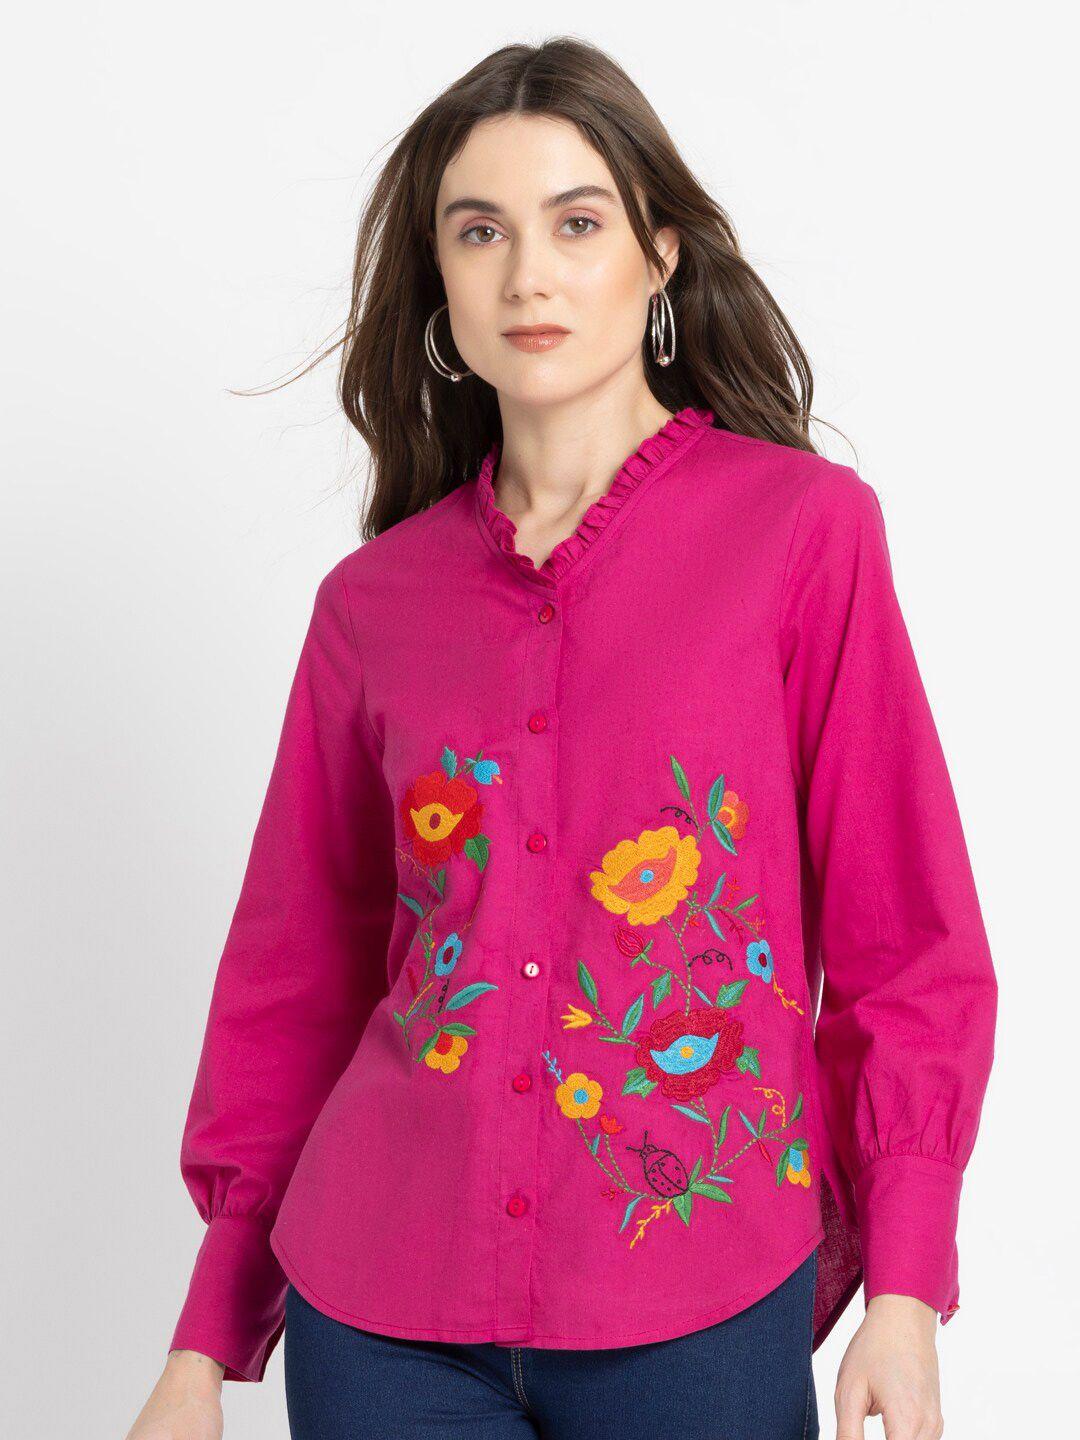 shaye floral embroidered cuffed sleeves cotton shirt style top